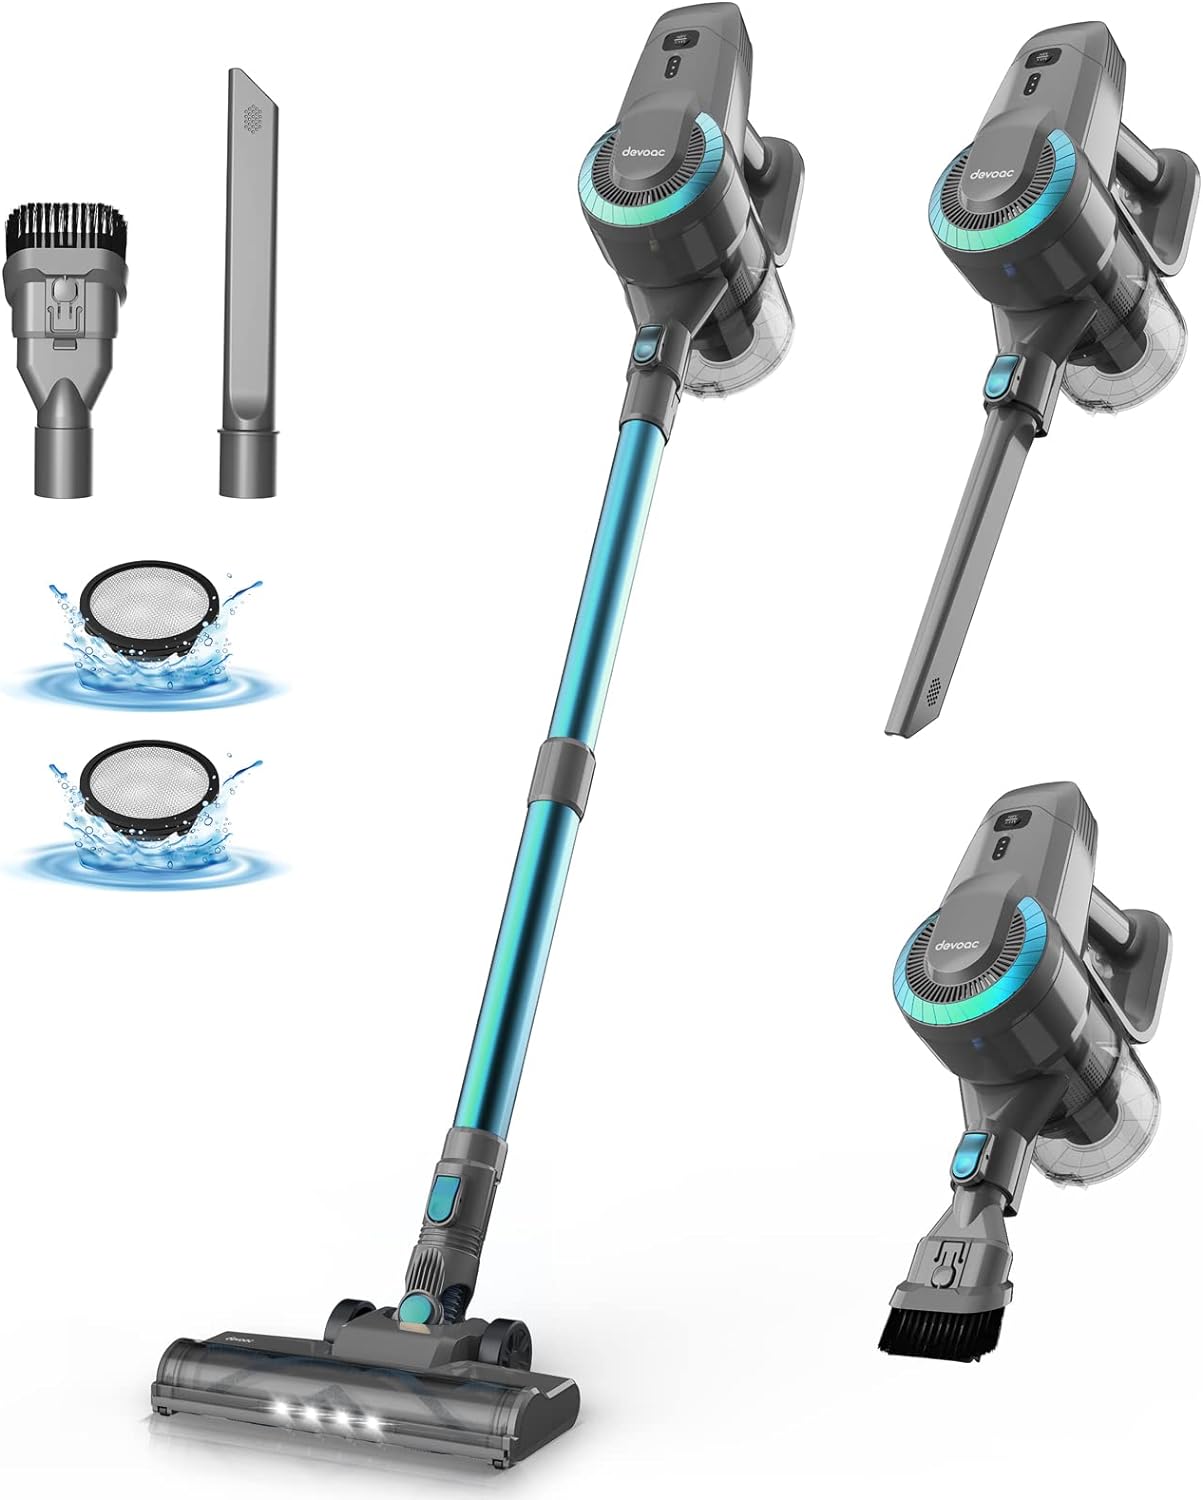 Devoac N300 Review: The Powerful and Affordable Cordless Vacuum Cleaner